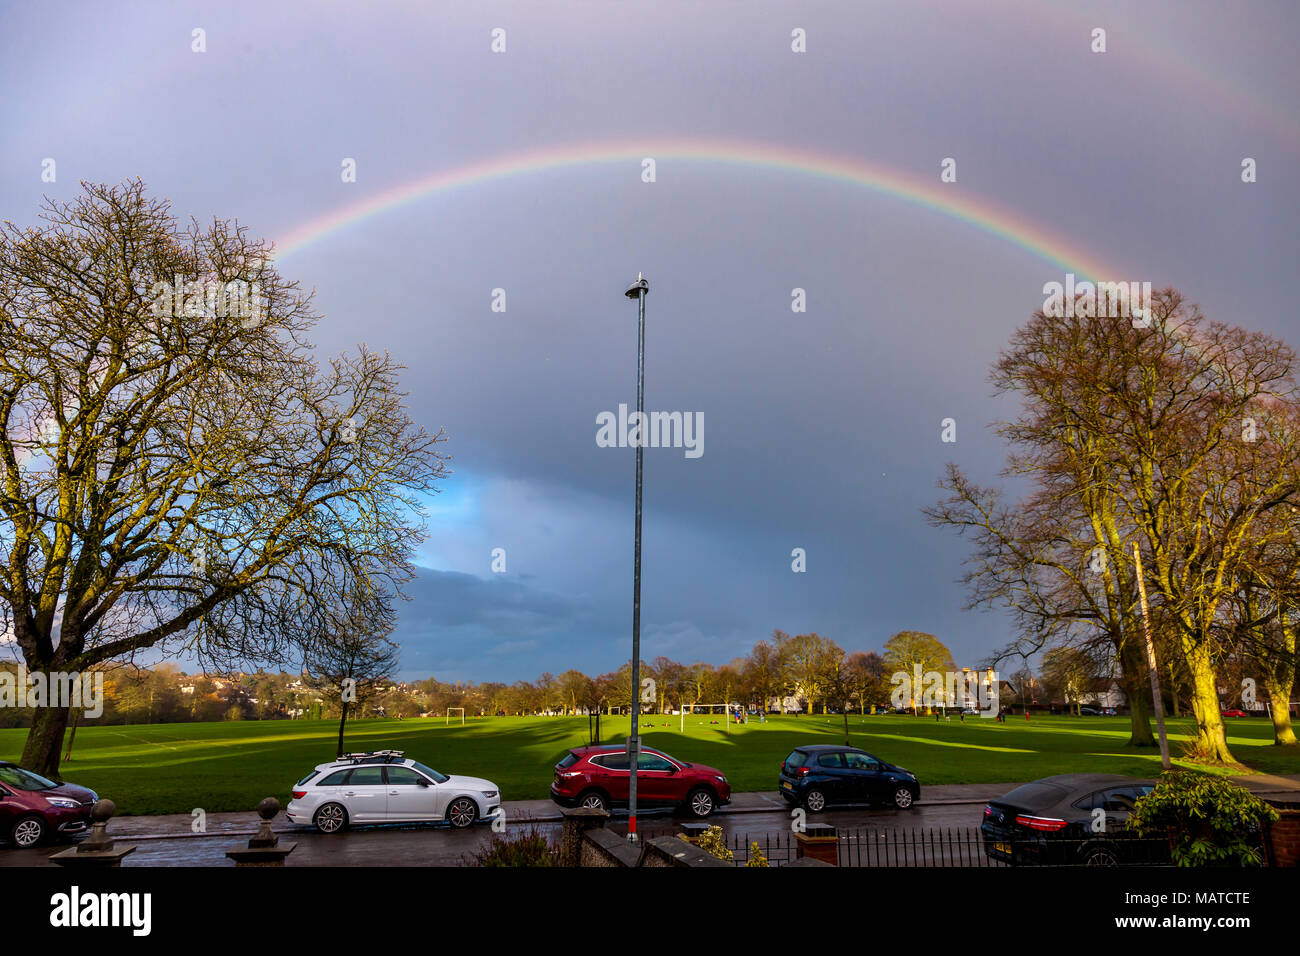 Northampton. UK. 4th Apr, 2018. UK Weather. After a wet and cloudy day the evening clouds are clearing and sunshine  is coming out giving a colourful rainbow over Park Ave South and Abington Park. Credit: Keith J Smith./Alamy Live News Stock Photo